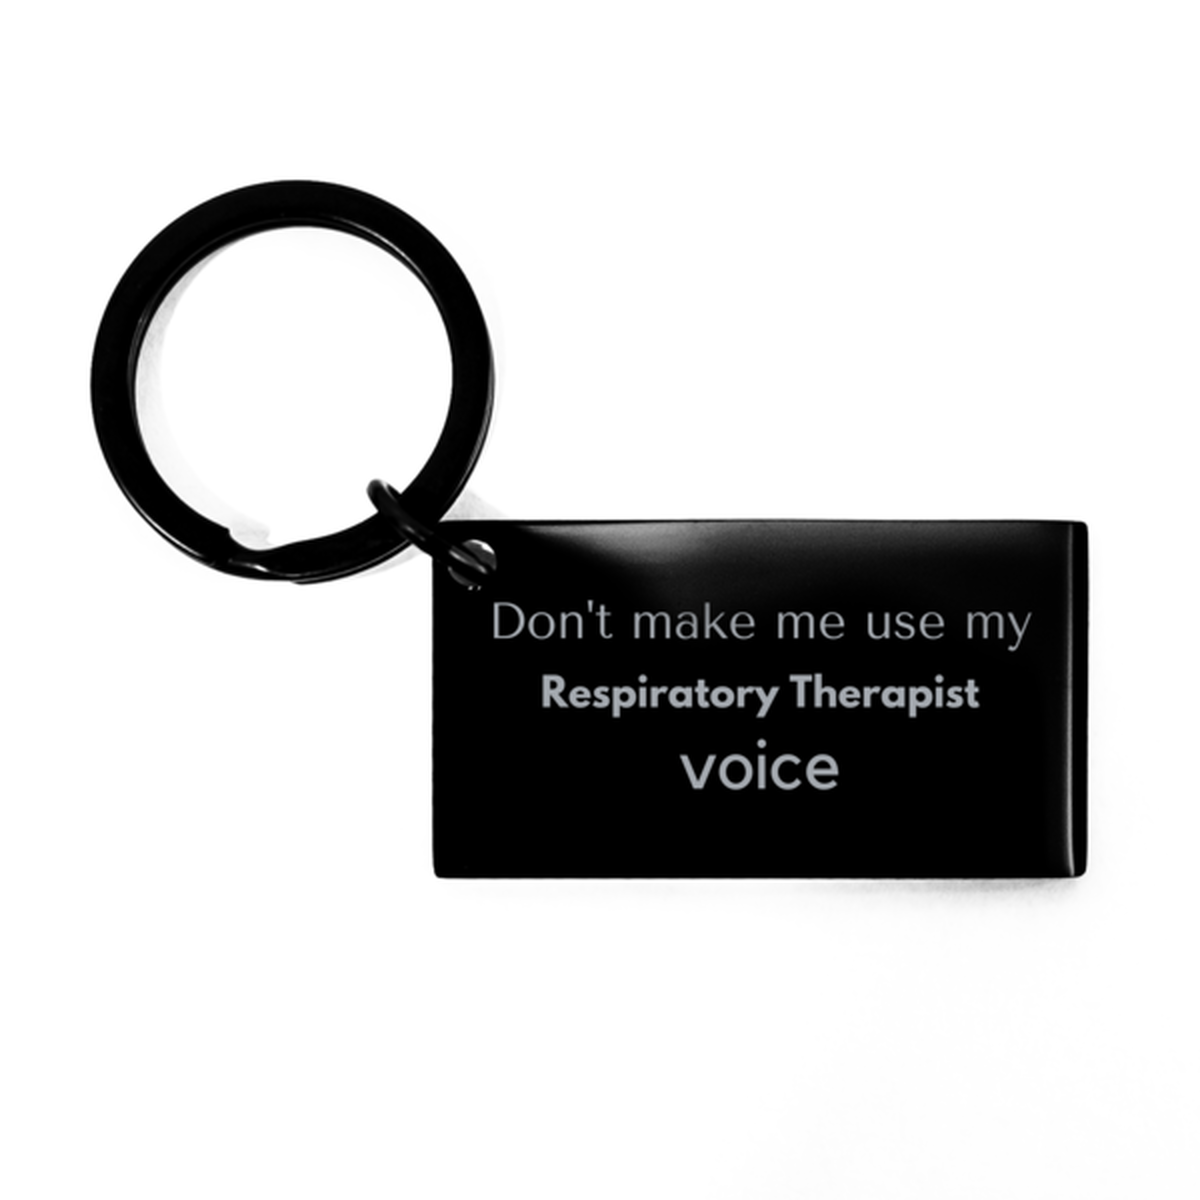 Don't make me use my Respiratory Therapist voice, Sarcasm Respiratory Therapist Gifts, Christmas Respiratory Therapist Keychain Birthday Unique Gifts For Respiratory Therapist Coworkers, Men, Women, Colleague, Friends